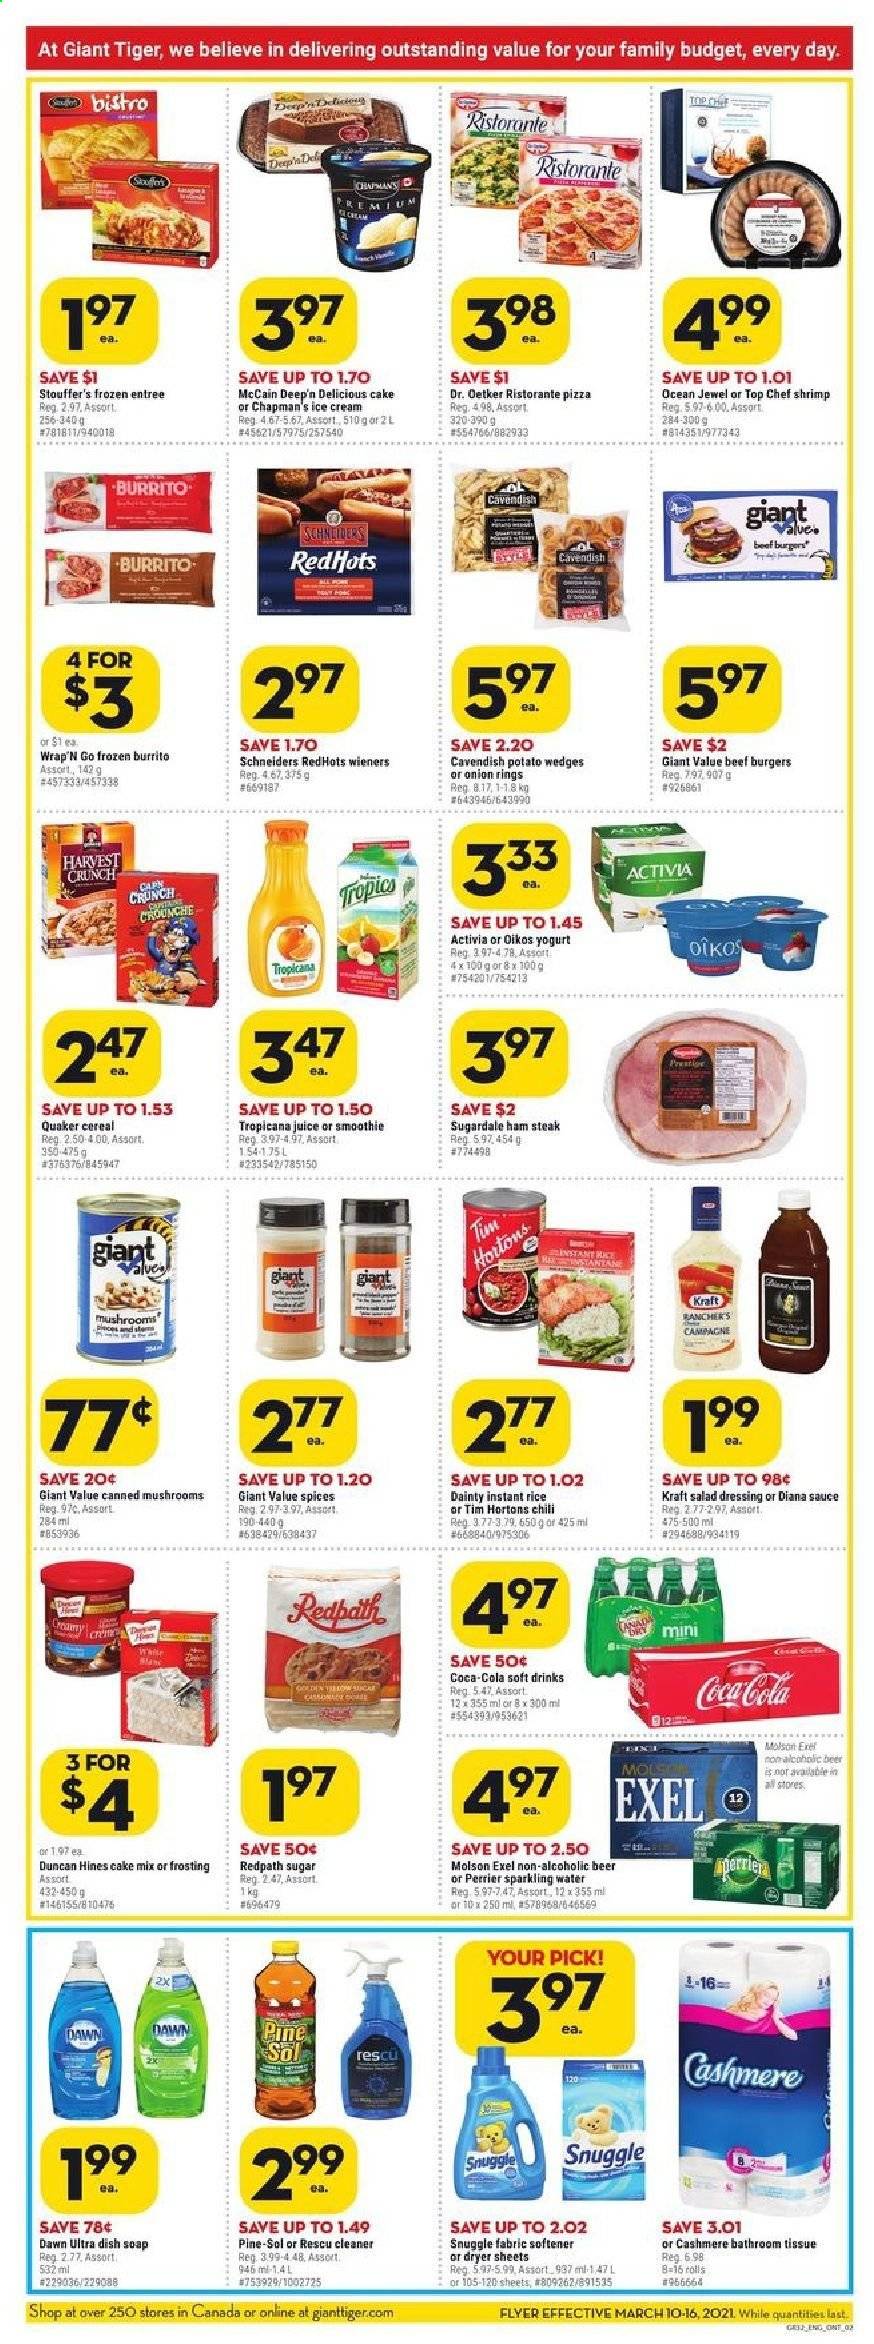 thumbnail - Giant Tiger Flyer - March 10, 2021 - March 16, 2021 - Sales products - cake mix, shrimps, pizza, onion rings, hamburger, sauce, burrito, Quaker, beef burger, Kraft®, Sugardale, ham, ham steaks, Dr. Oetker, yoghurt, Activia, Oikos, ice cream, Stouffer's, McCain, potato wedges, frosting, sugar, canned mushrooms, cereals, salad dressing, dressing, Coca-Cola, juice, soft drink, Perrier, smoothie, sparkling water, beer, bath tissue, cleaner, Pine-Sol, Snuggle, fabric softener, dryer sheets, soap, steak. Page 2.